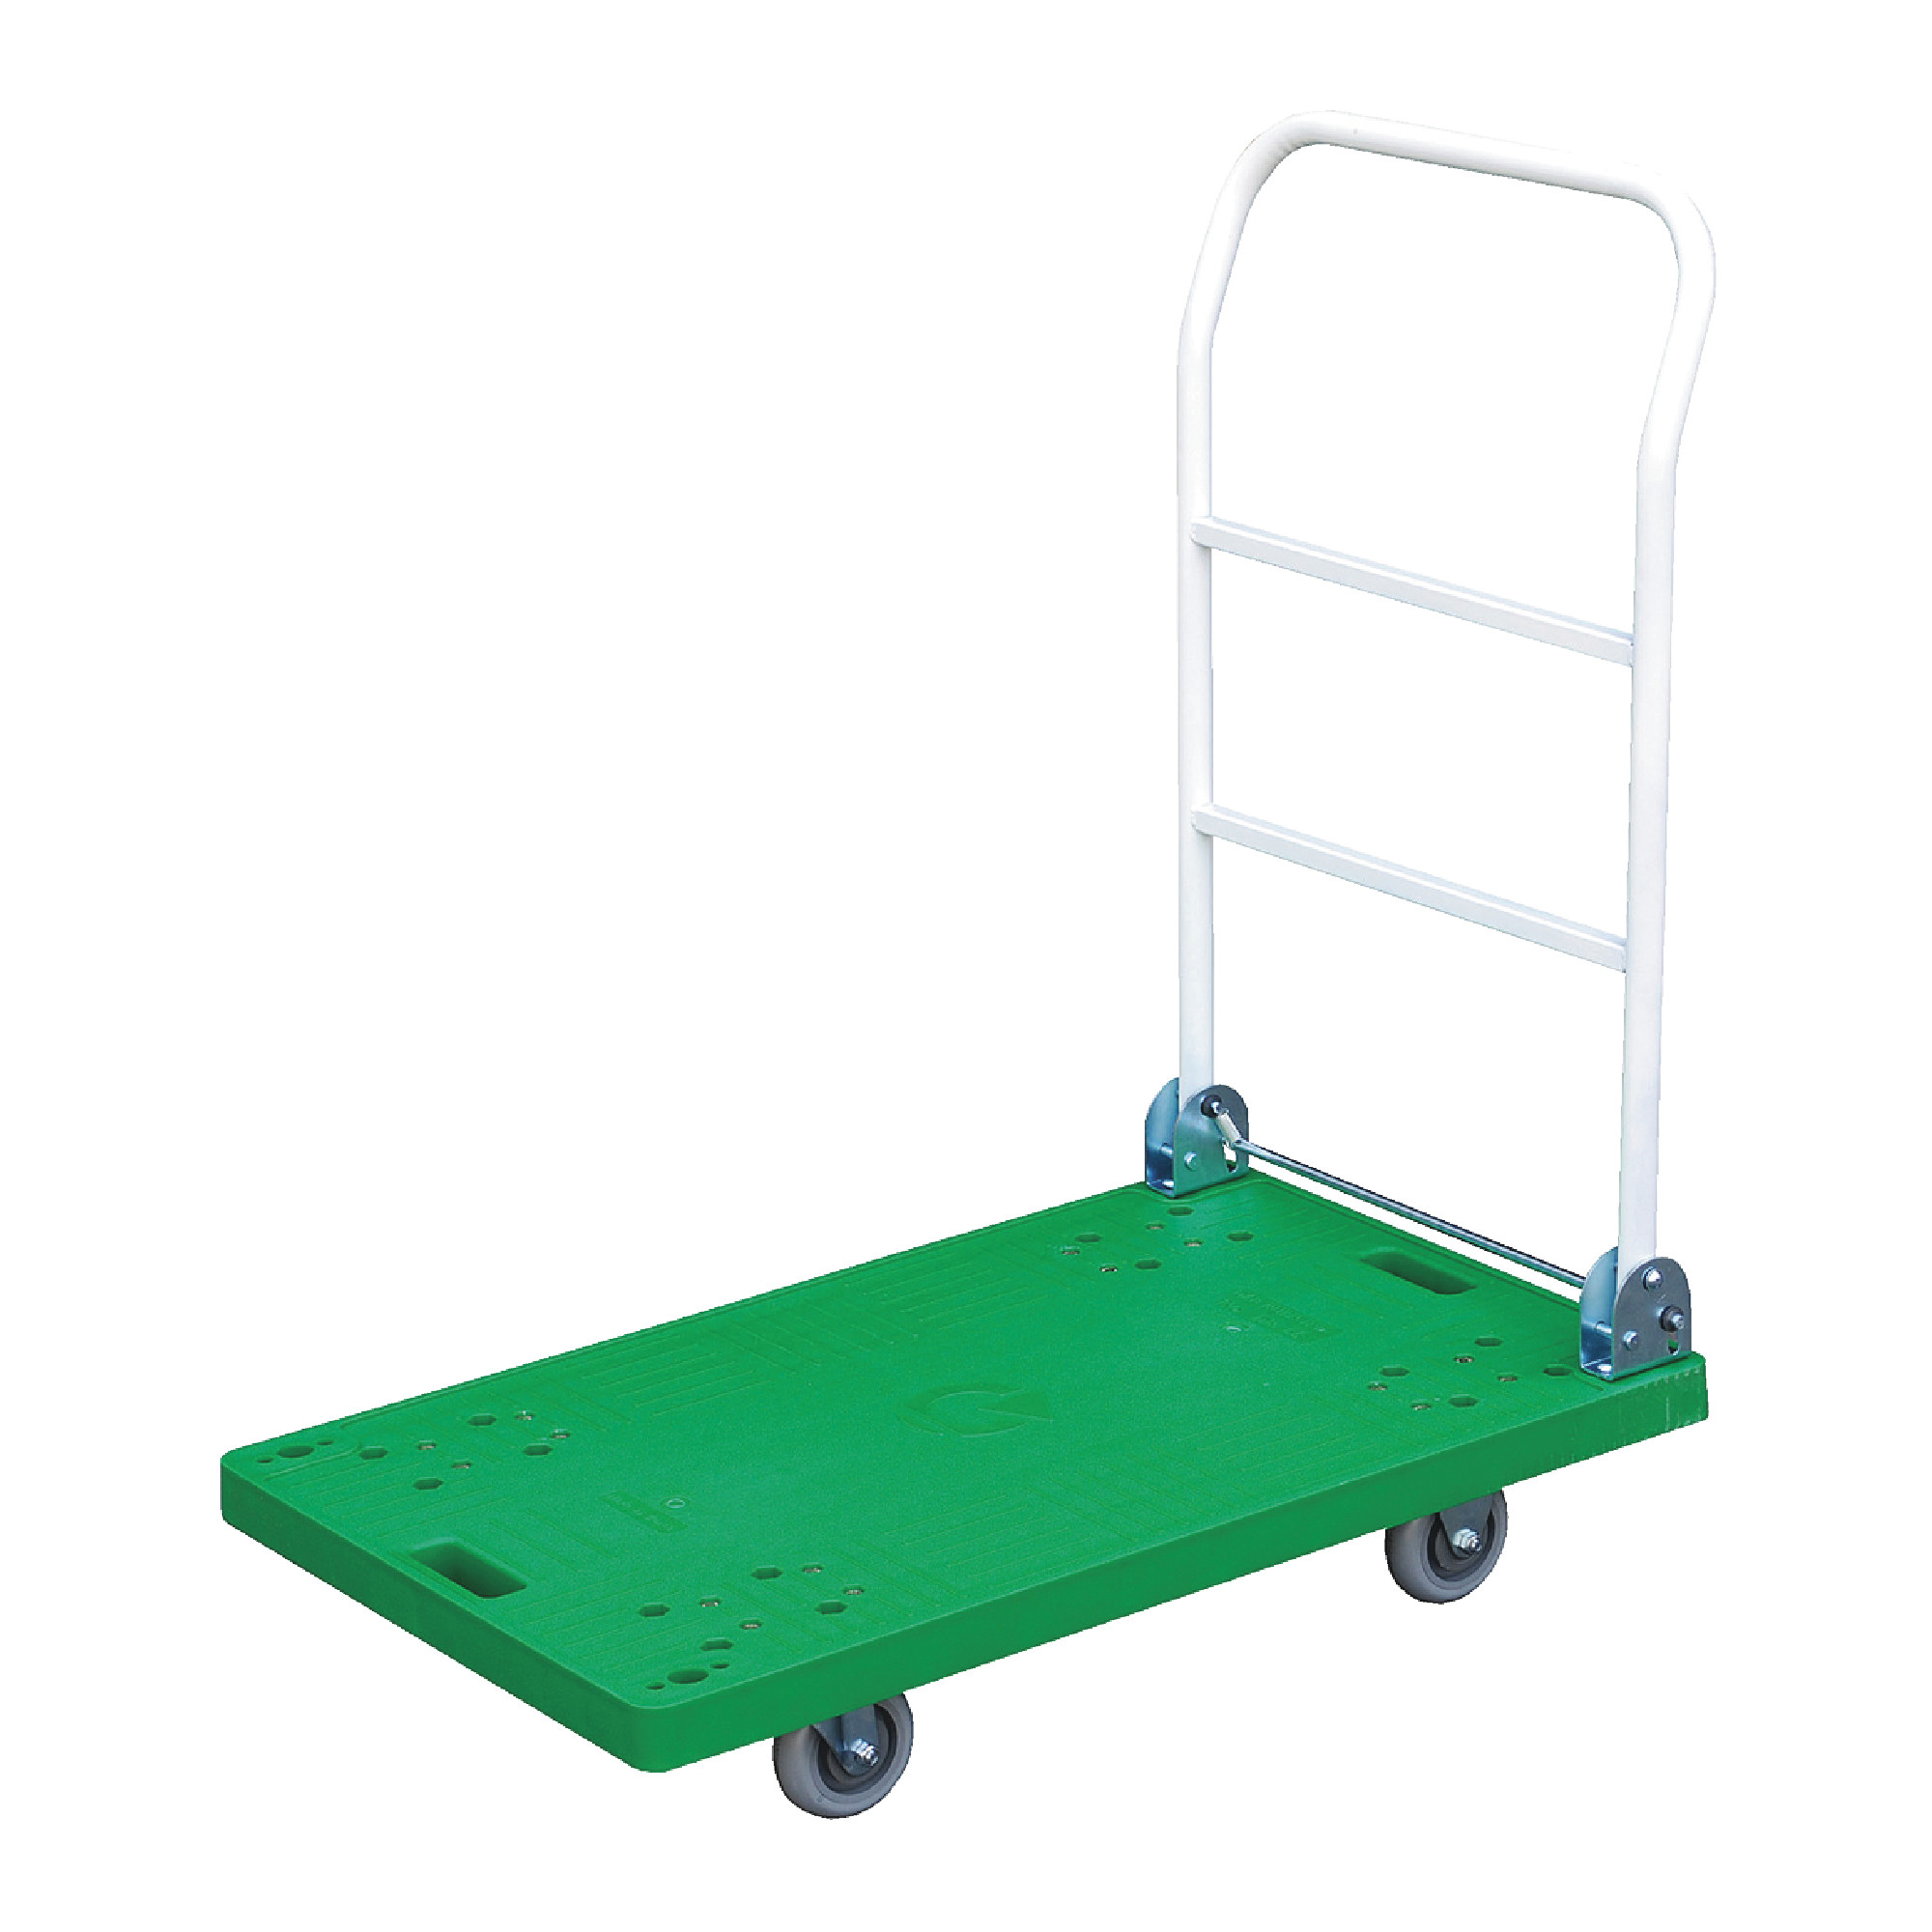 Platform Rolling Trucks With Fold Down Handle